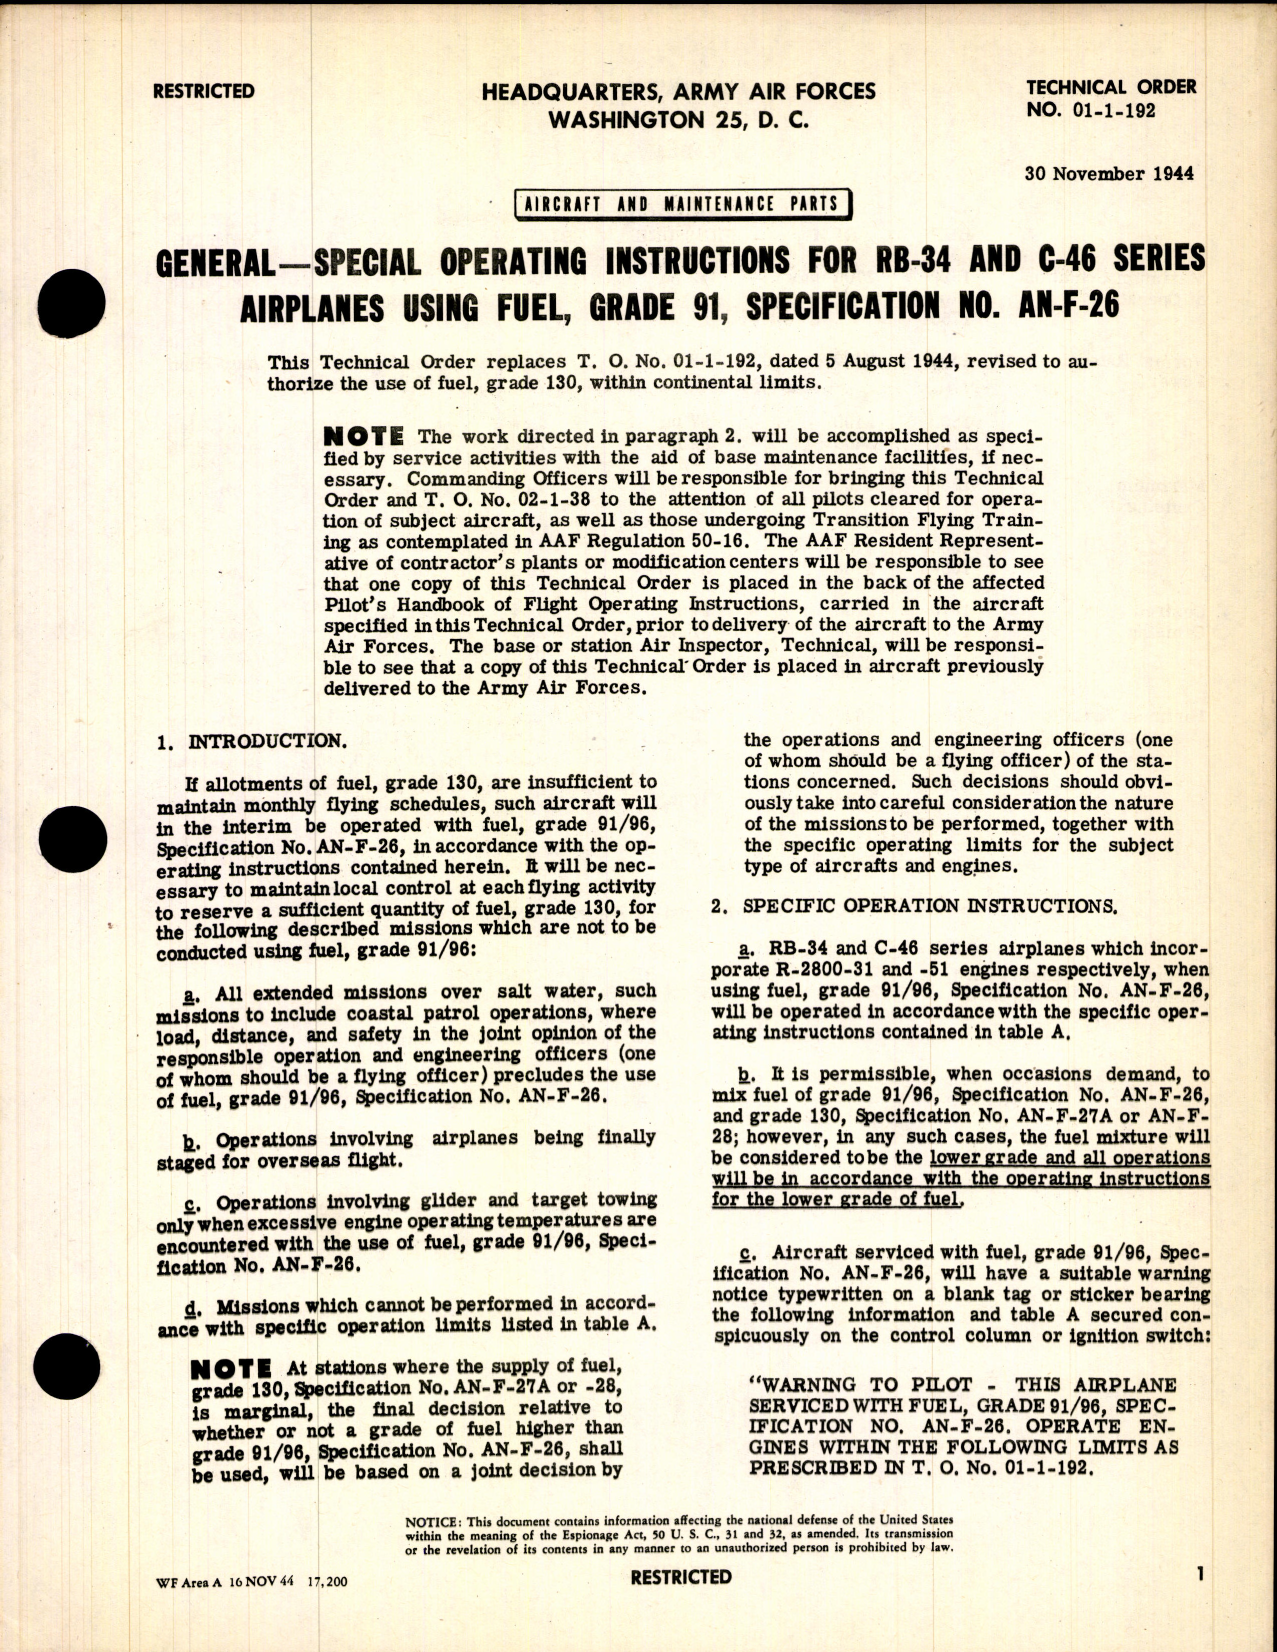 Sample page 1 from AirCorps Library document: Special Operating Instructions for RB-34 and C-46 Series Airplanes using Fuel Grade 91